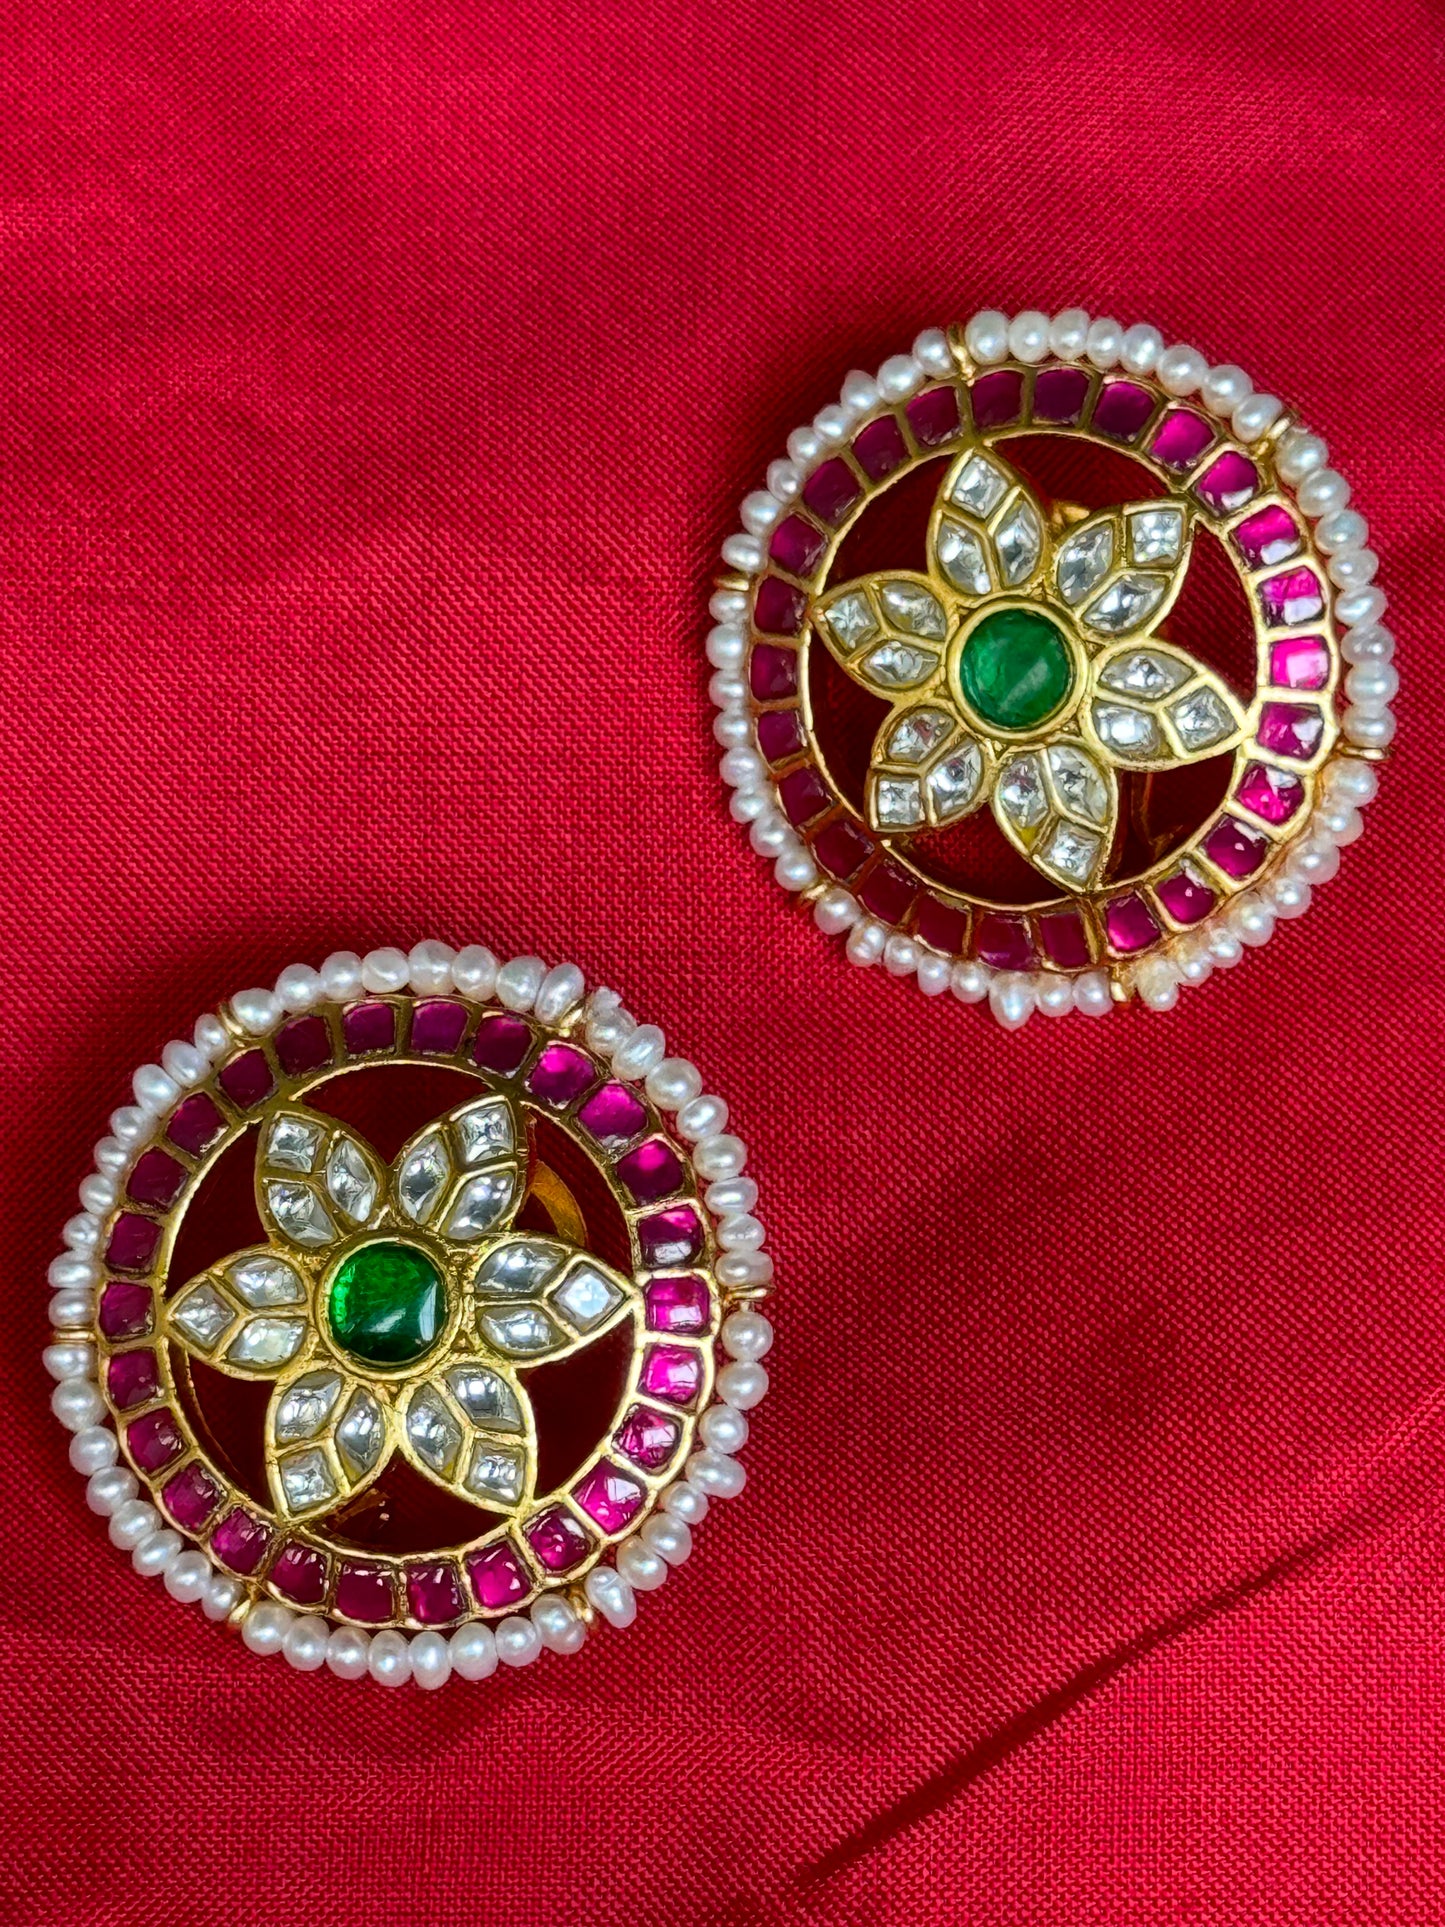 Big round earrings - white and pink circles, flower at center - Gold polish 92.5 sterling silver